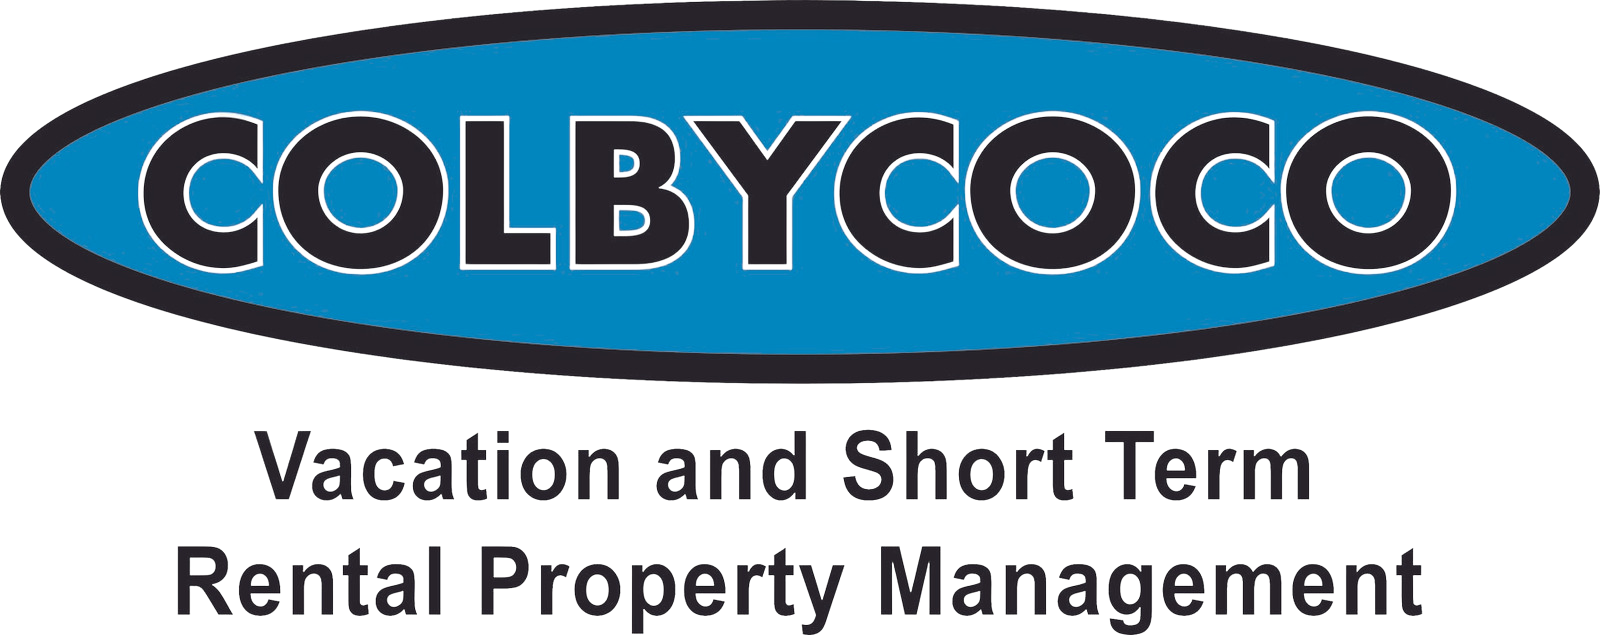 Colbycoco Vacation and Short Term Rentals logo